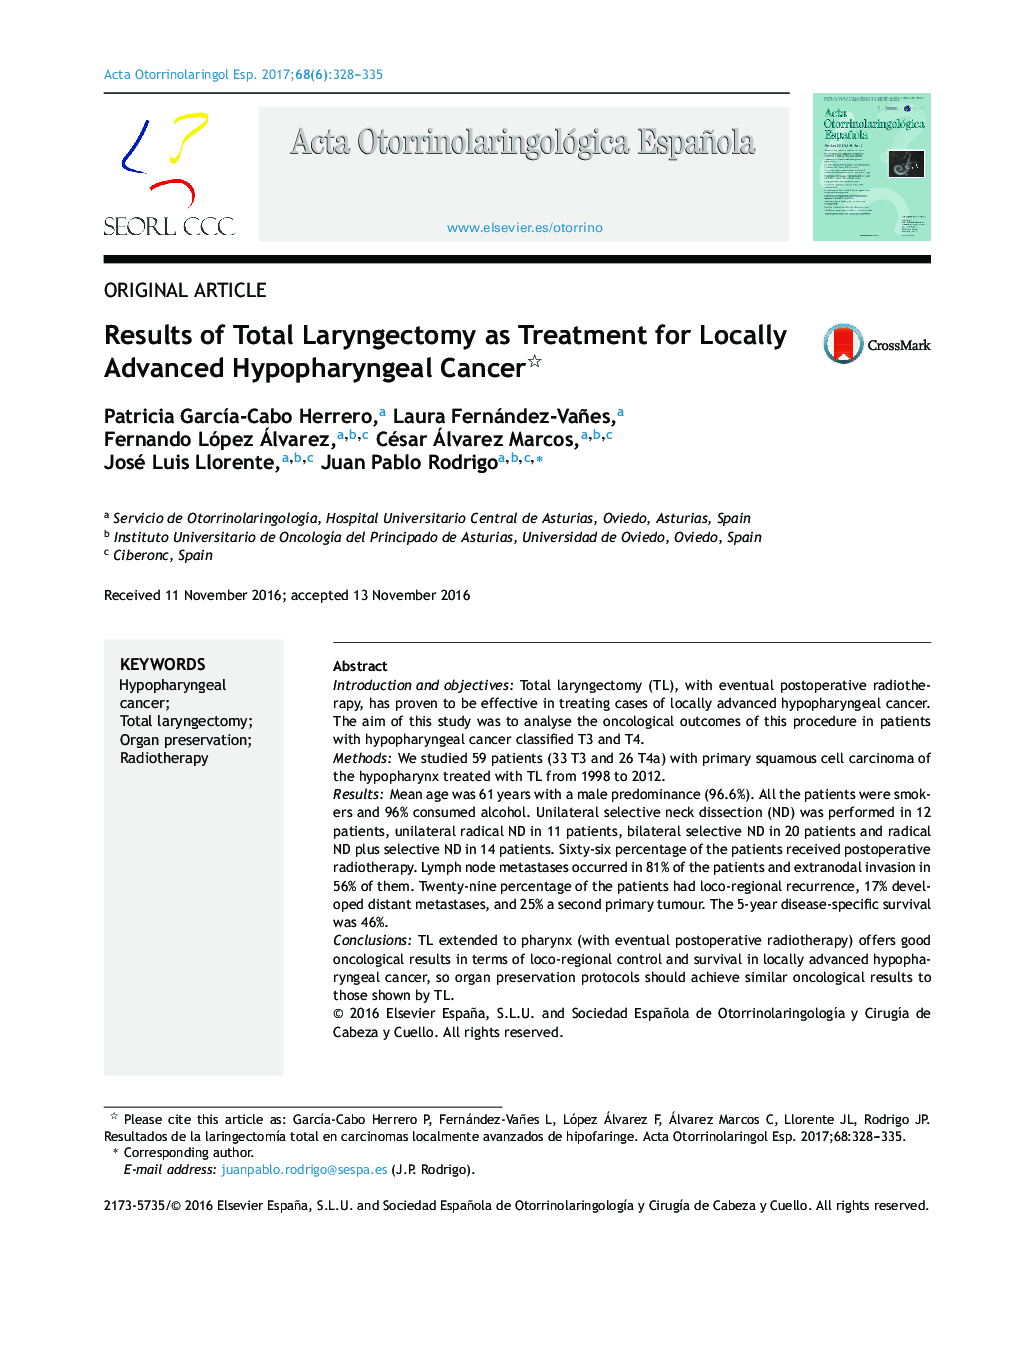 Results of Total Laryngectomy as Treatment for Locally Advanced Hypopharyngeal Cancer